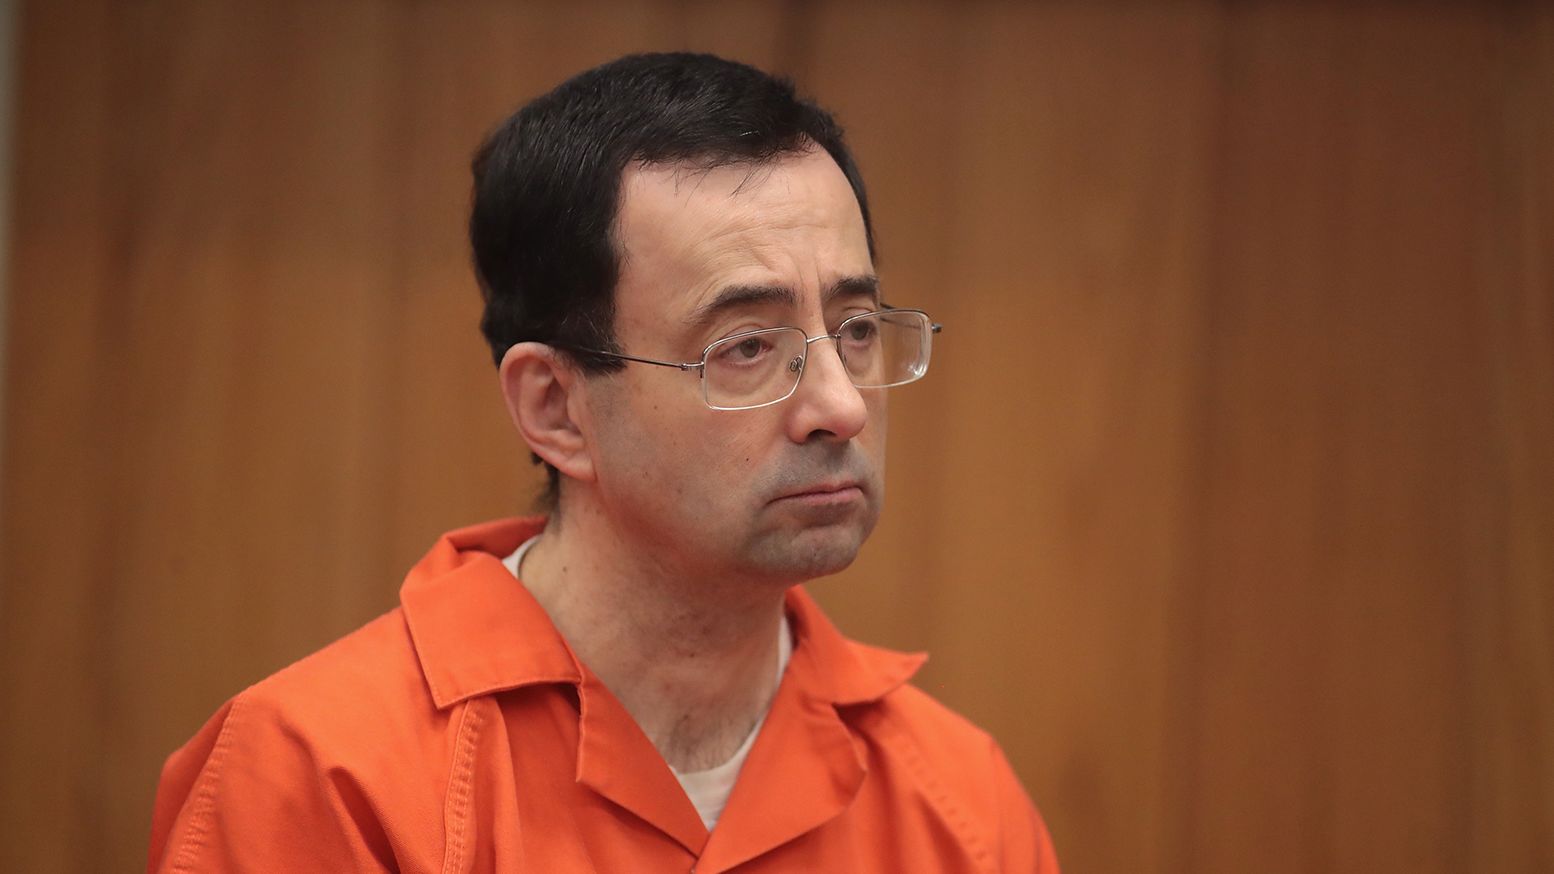 Larry Nassar stands as he is sentenced for three counts of criminal sexual assault in Eaton County Circuit Court on February 5, 2018 in Charlotte, Michigan.